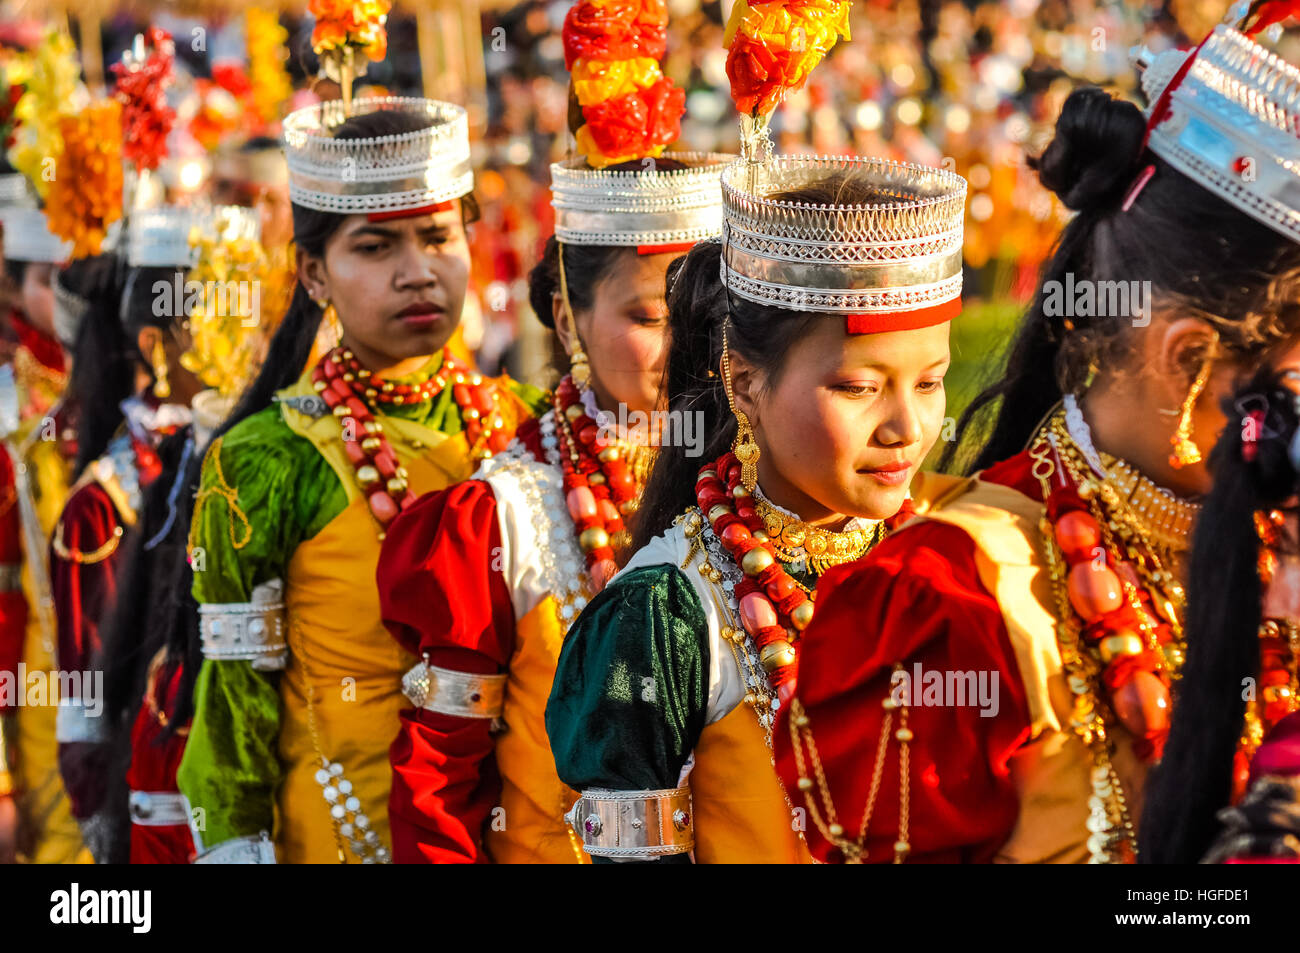 Shillong, Meghalaya - circa April 2012: Young girls wear traditional colourful costumes with large necklaces during Shad Suk Mynsiem Festival in Shill Stock Photo